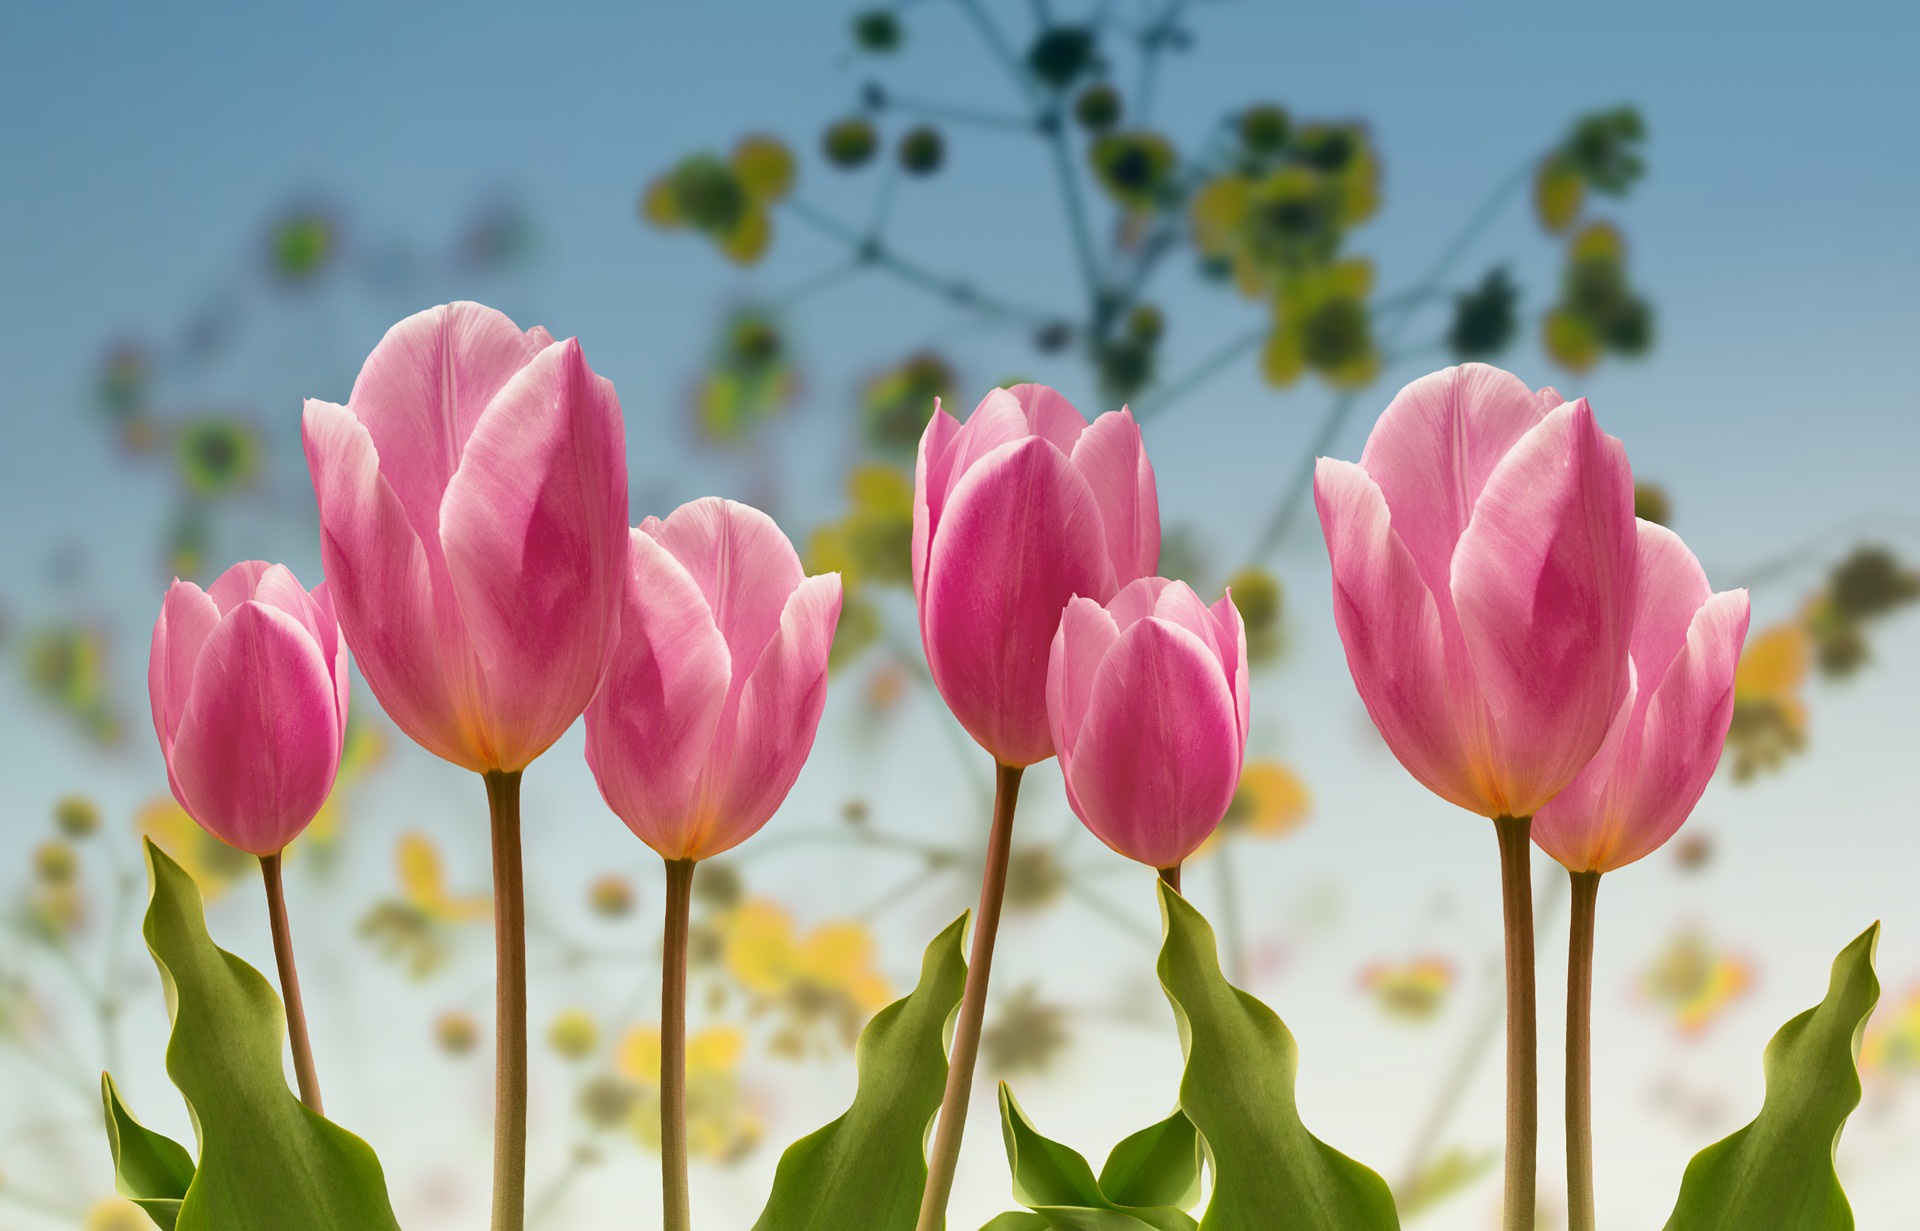 Wallpapers Tulips Wallpapers